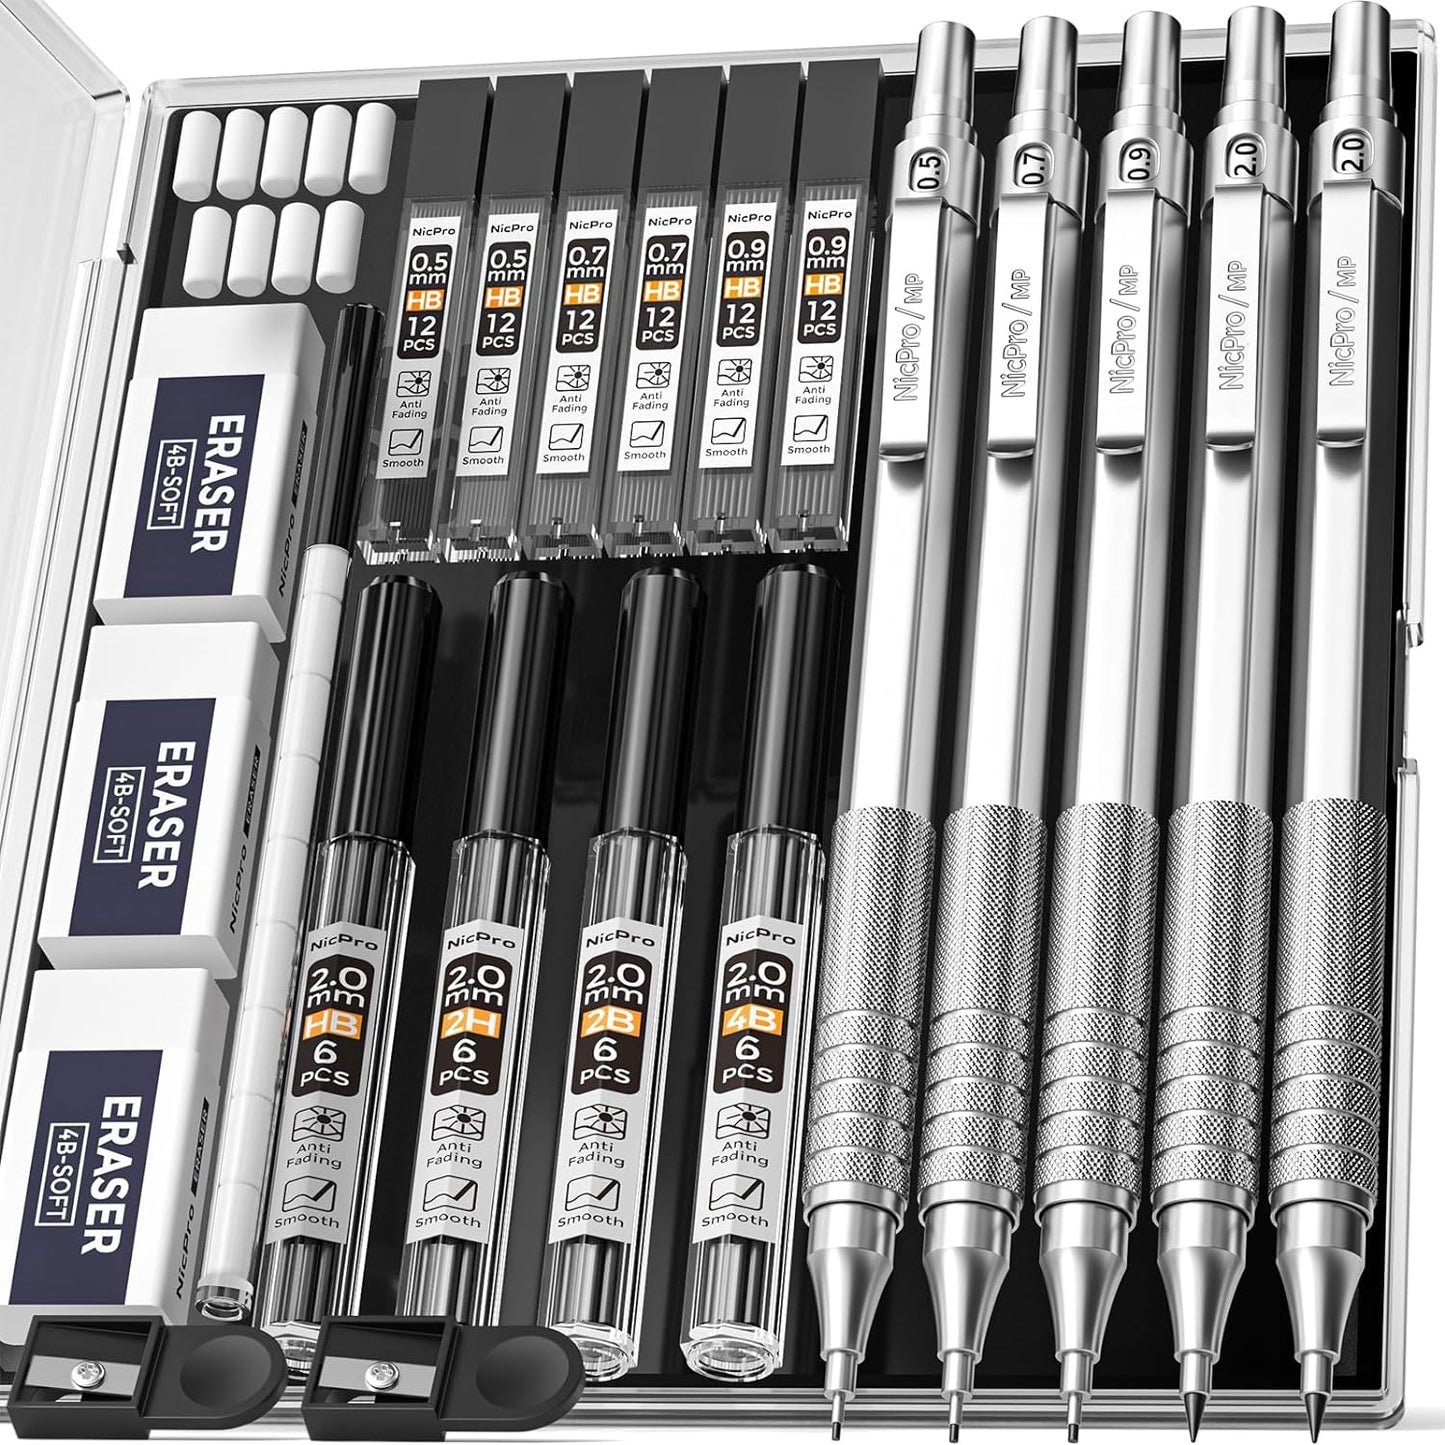 22PCS Metal Mechanical Pencil Set in Case, Art Drafting Pencil 0.5, 0.7, 0.9 Mm & 2 PCS 2Mm Graphite Lead Holder(4B 2B HB 2H) for Drawing Writing Sketching with 10 Tube Lead Refills Erasers